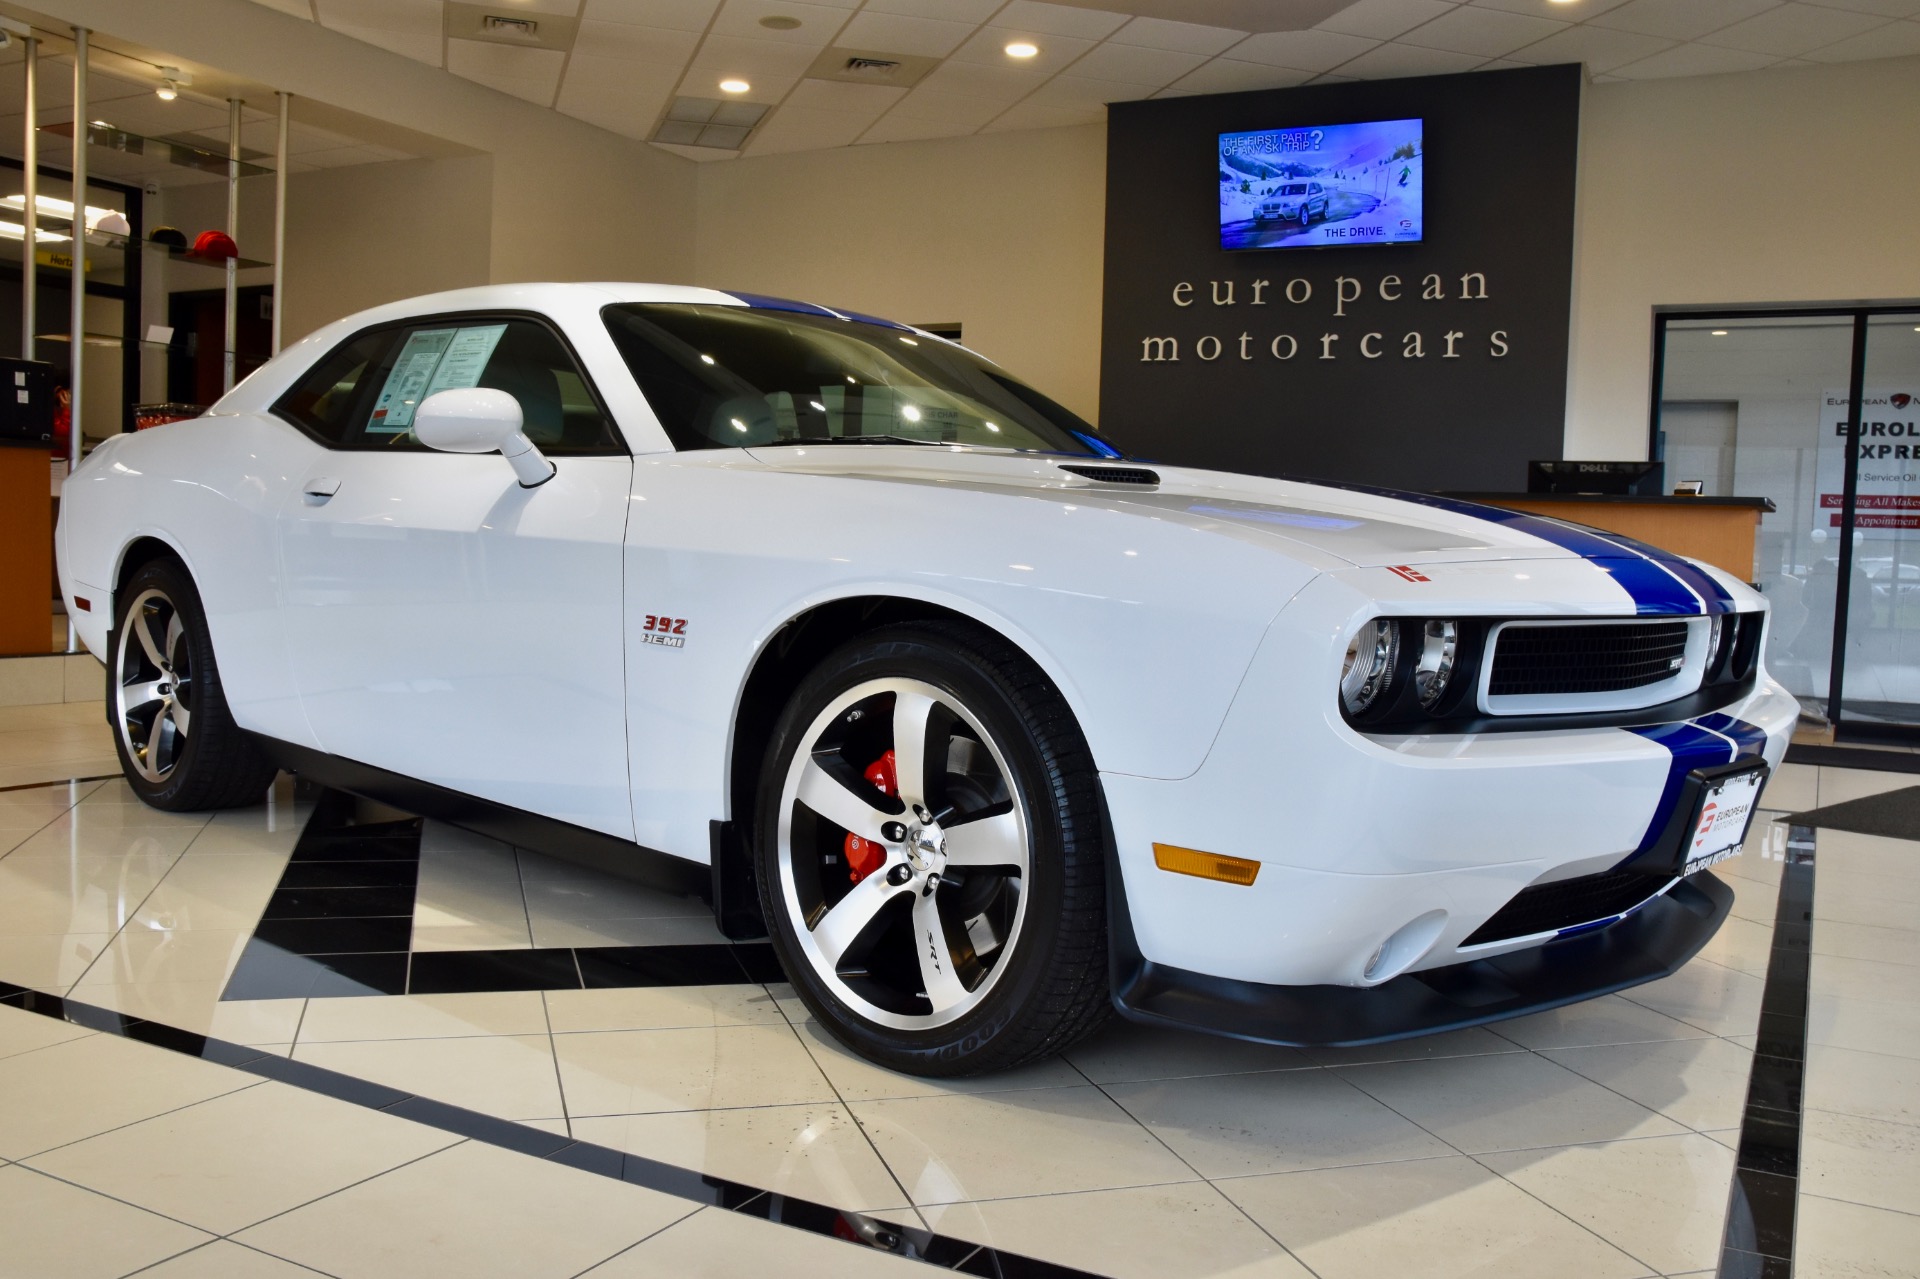 Used 2011 Dodge Challenger Inaugural Edition 400 Srt8 392 For Sale Sold European Motorcars